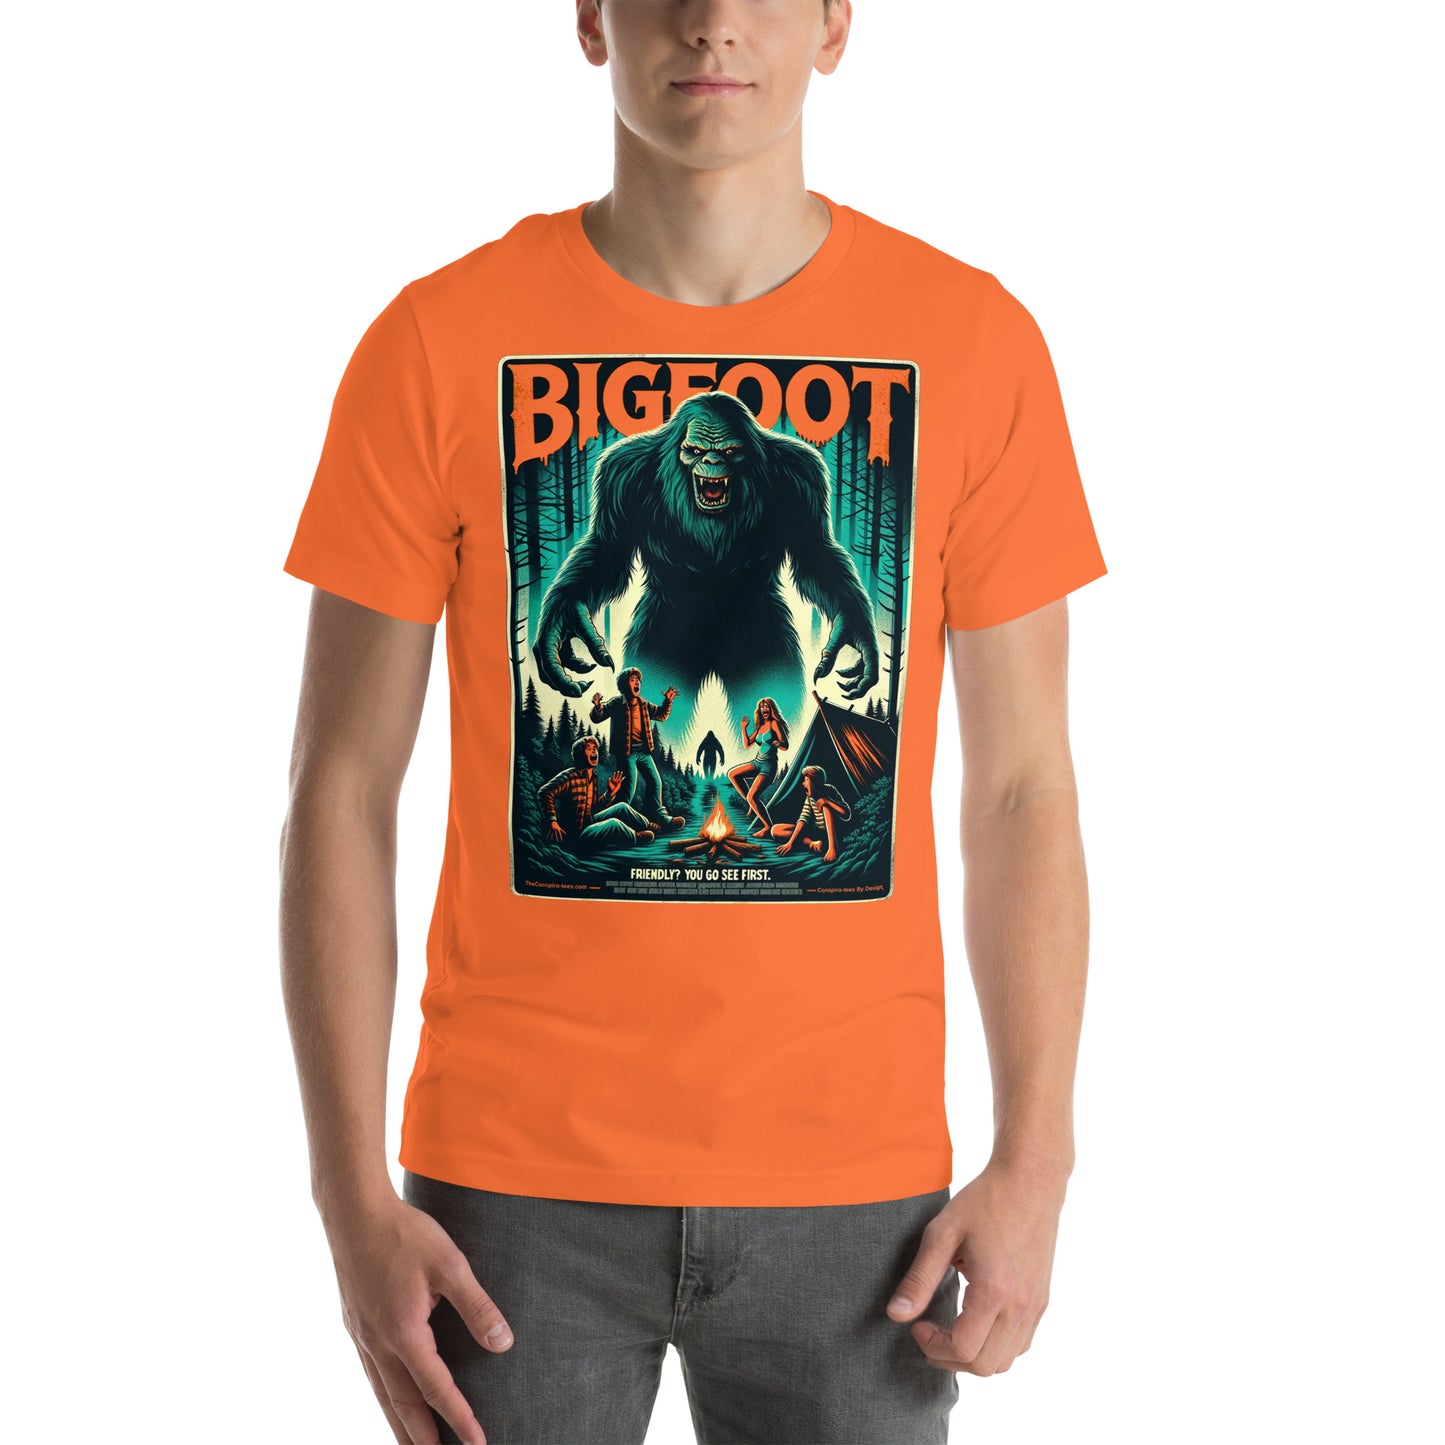 Bigfoot Friendly? You go see first Unisex t-shirt